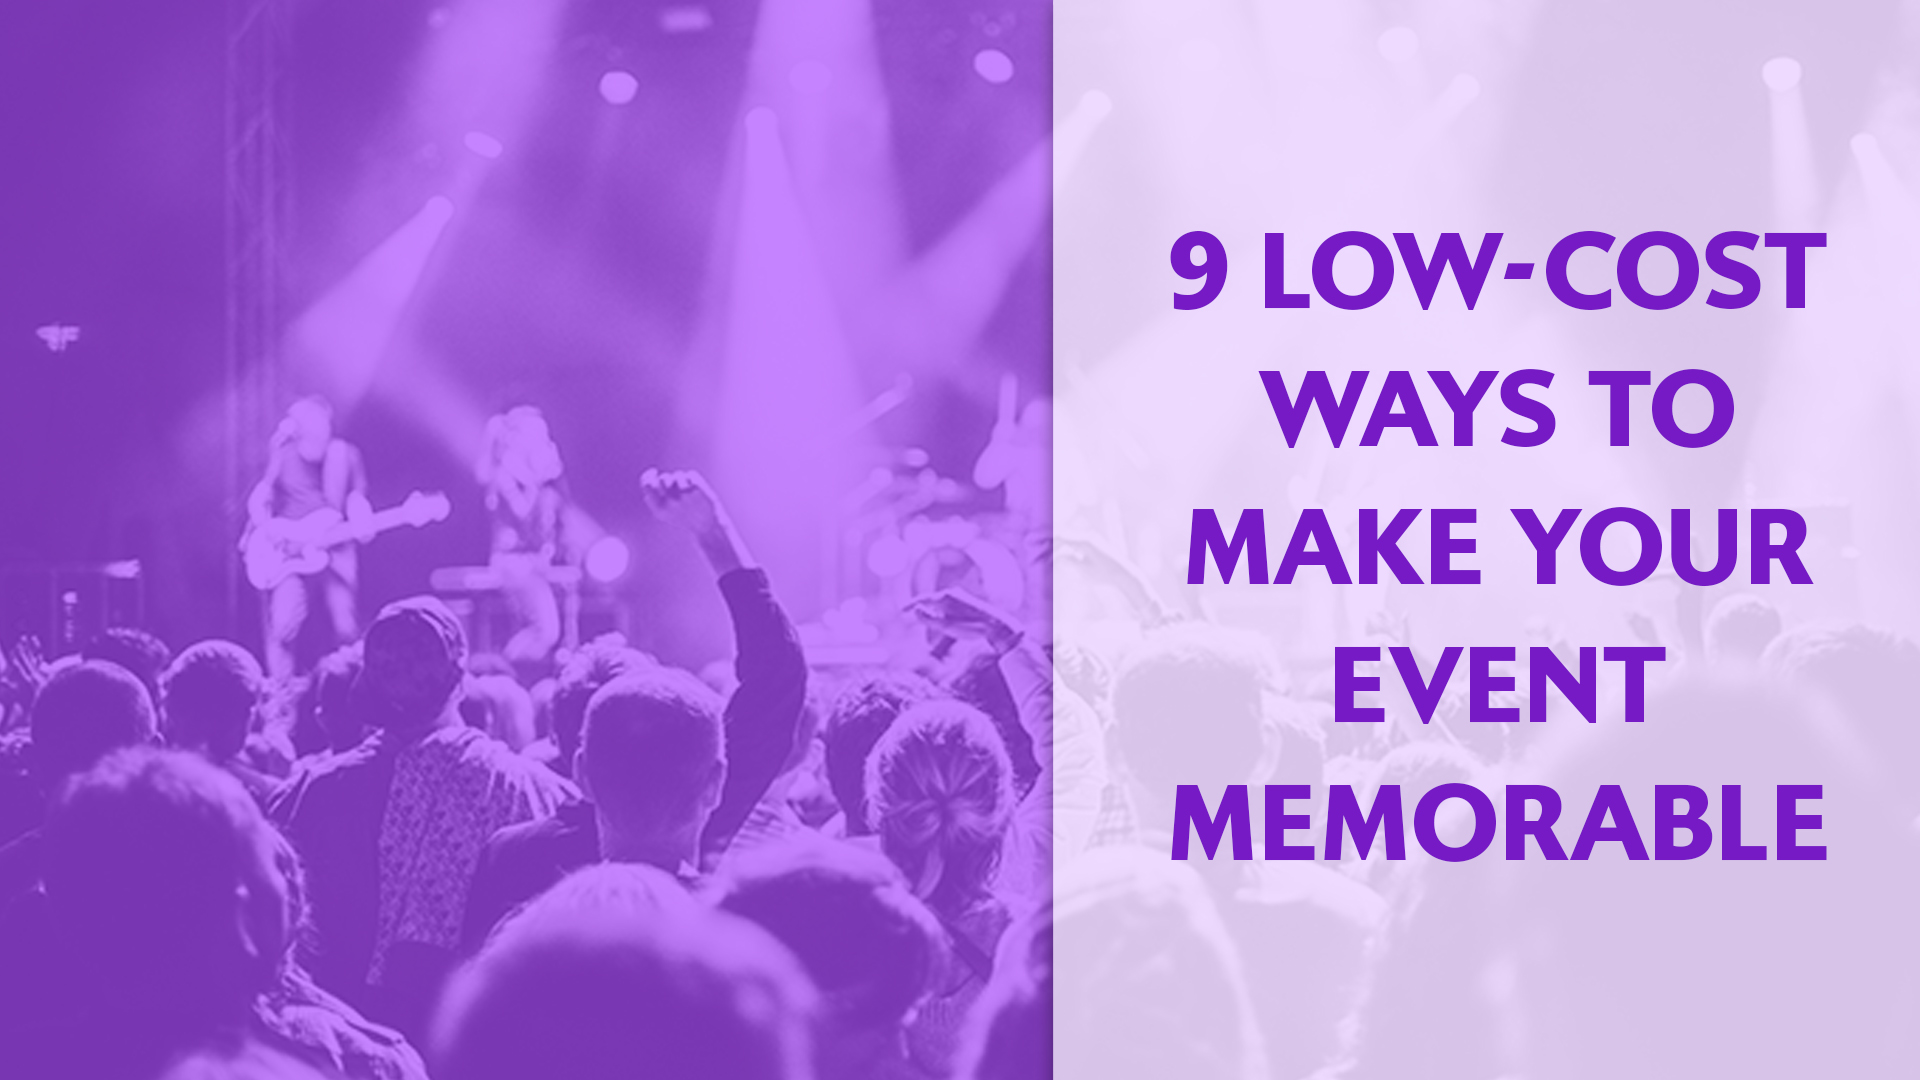 9 Low-Cost Ways to Make Your Event Memorable